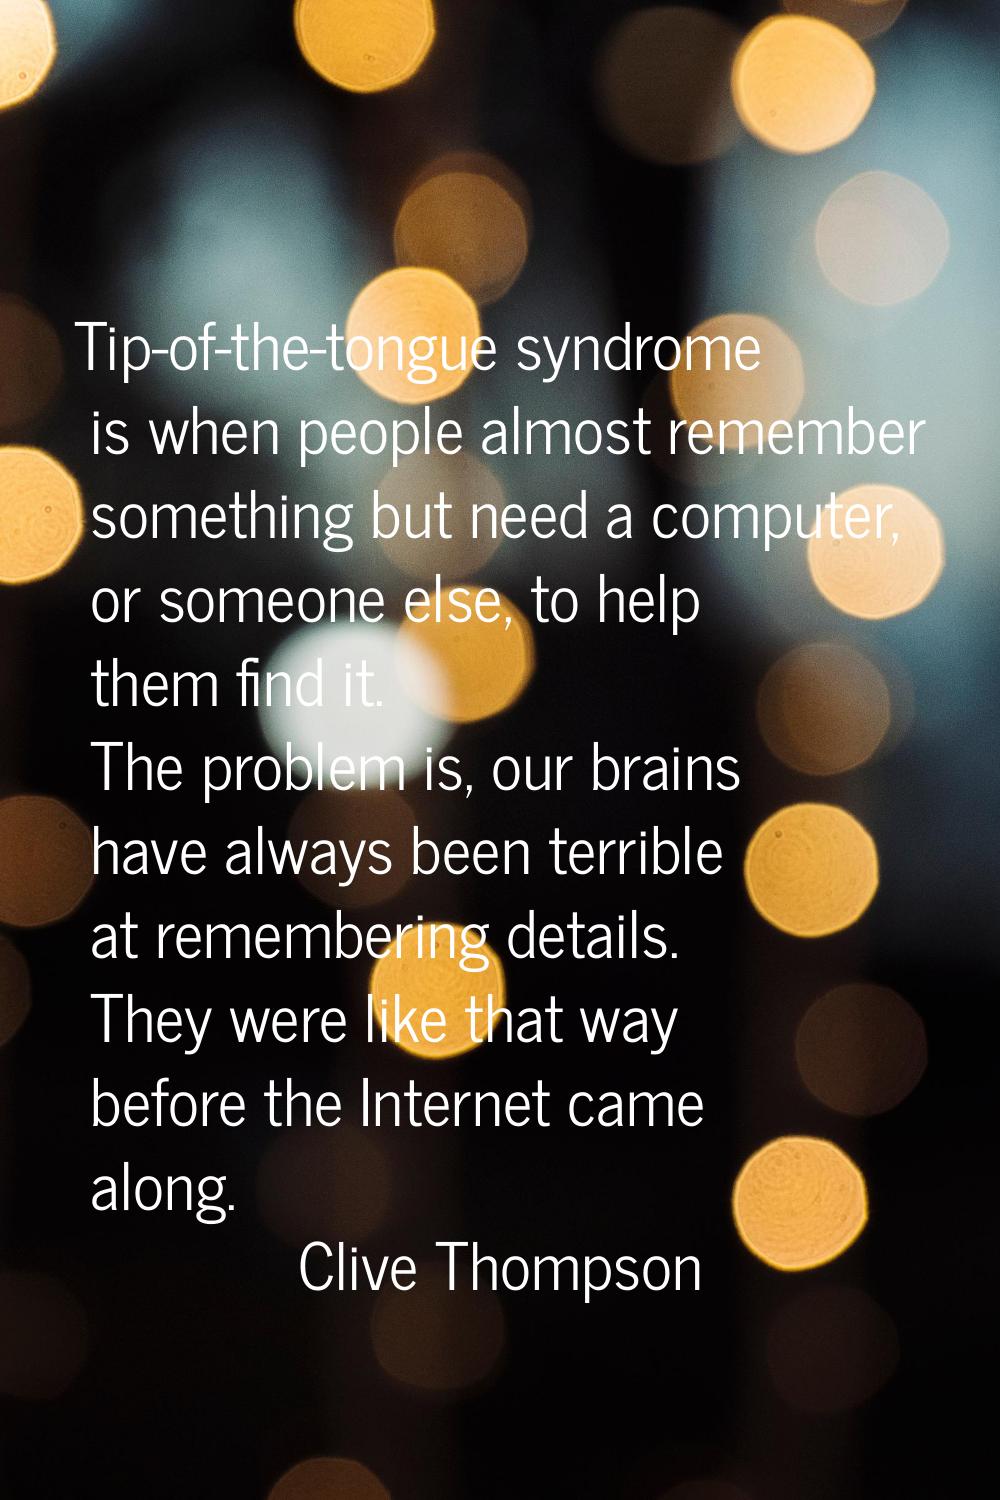 Tip-of-the-tongue syndrome is when people almost remember something but need a computer, or someone